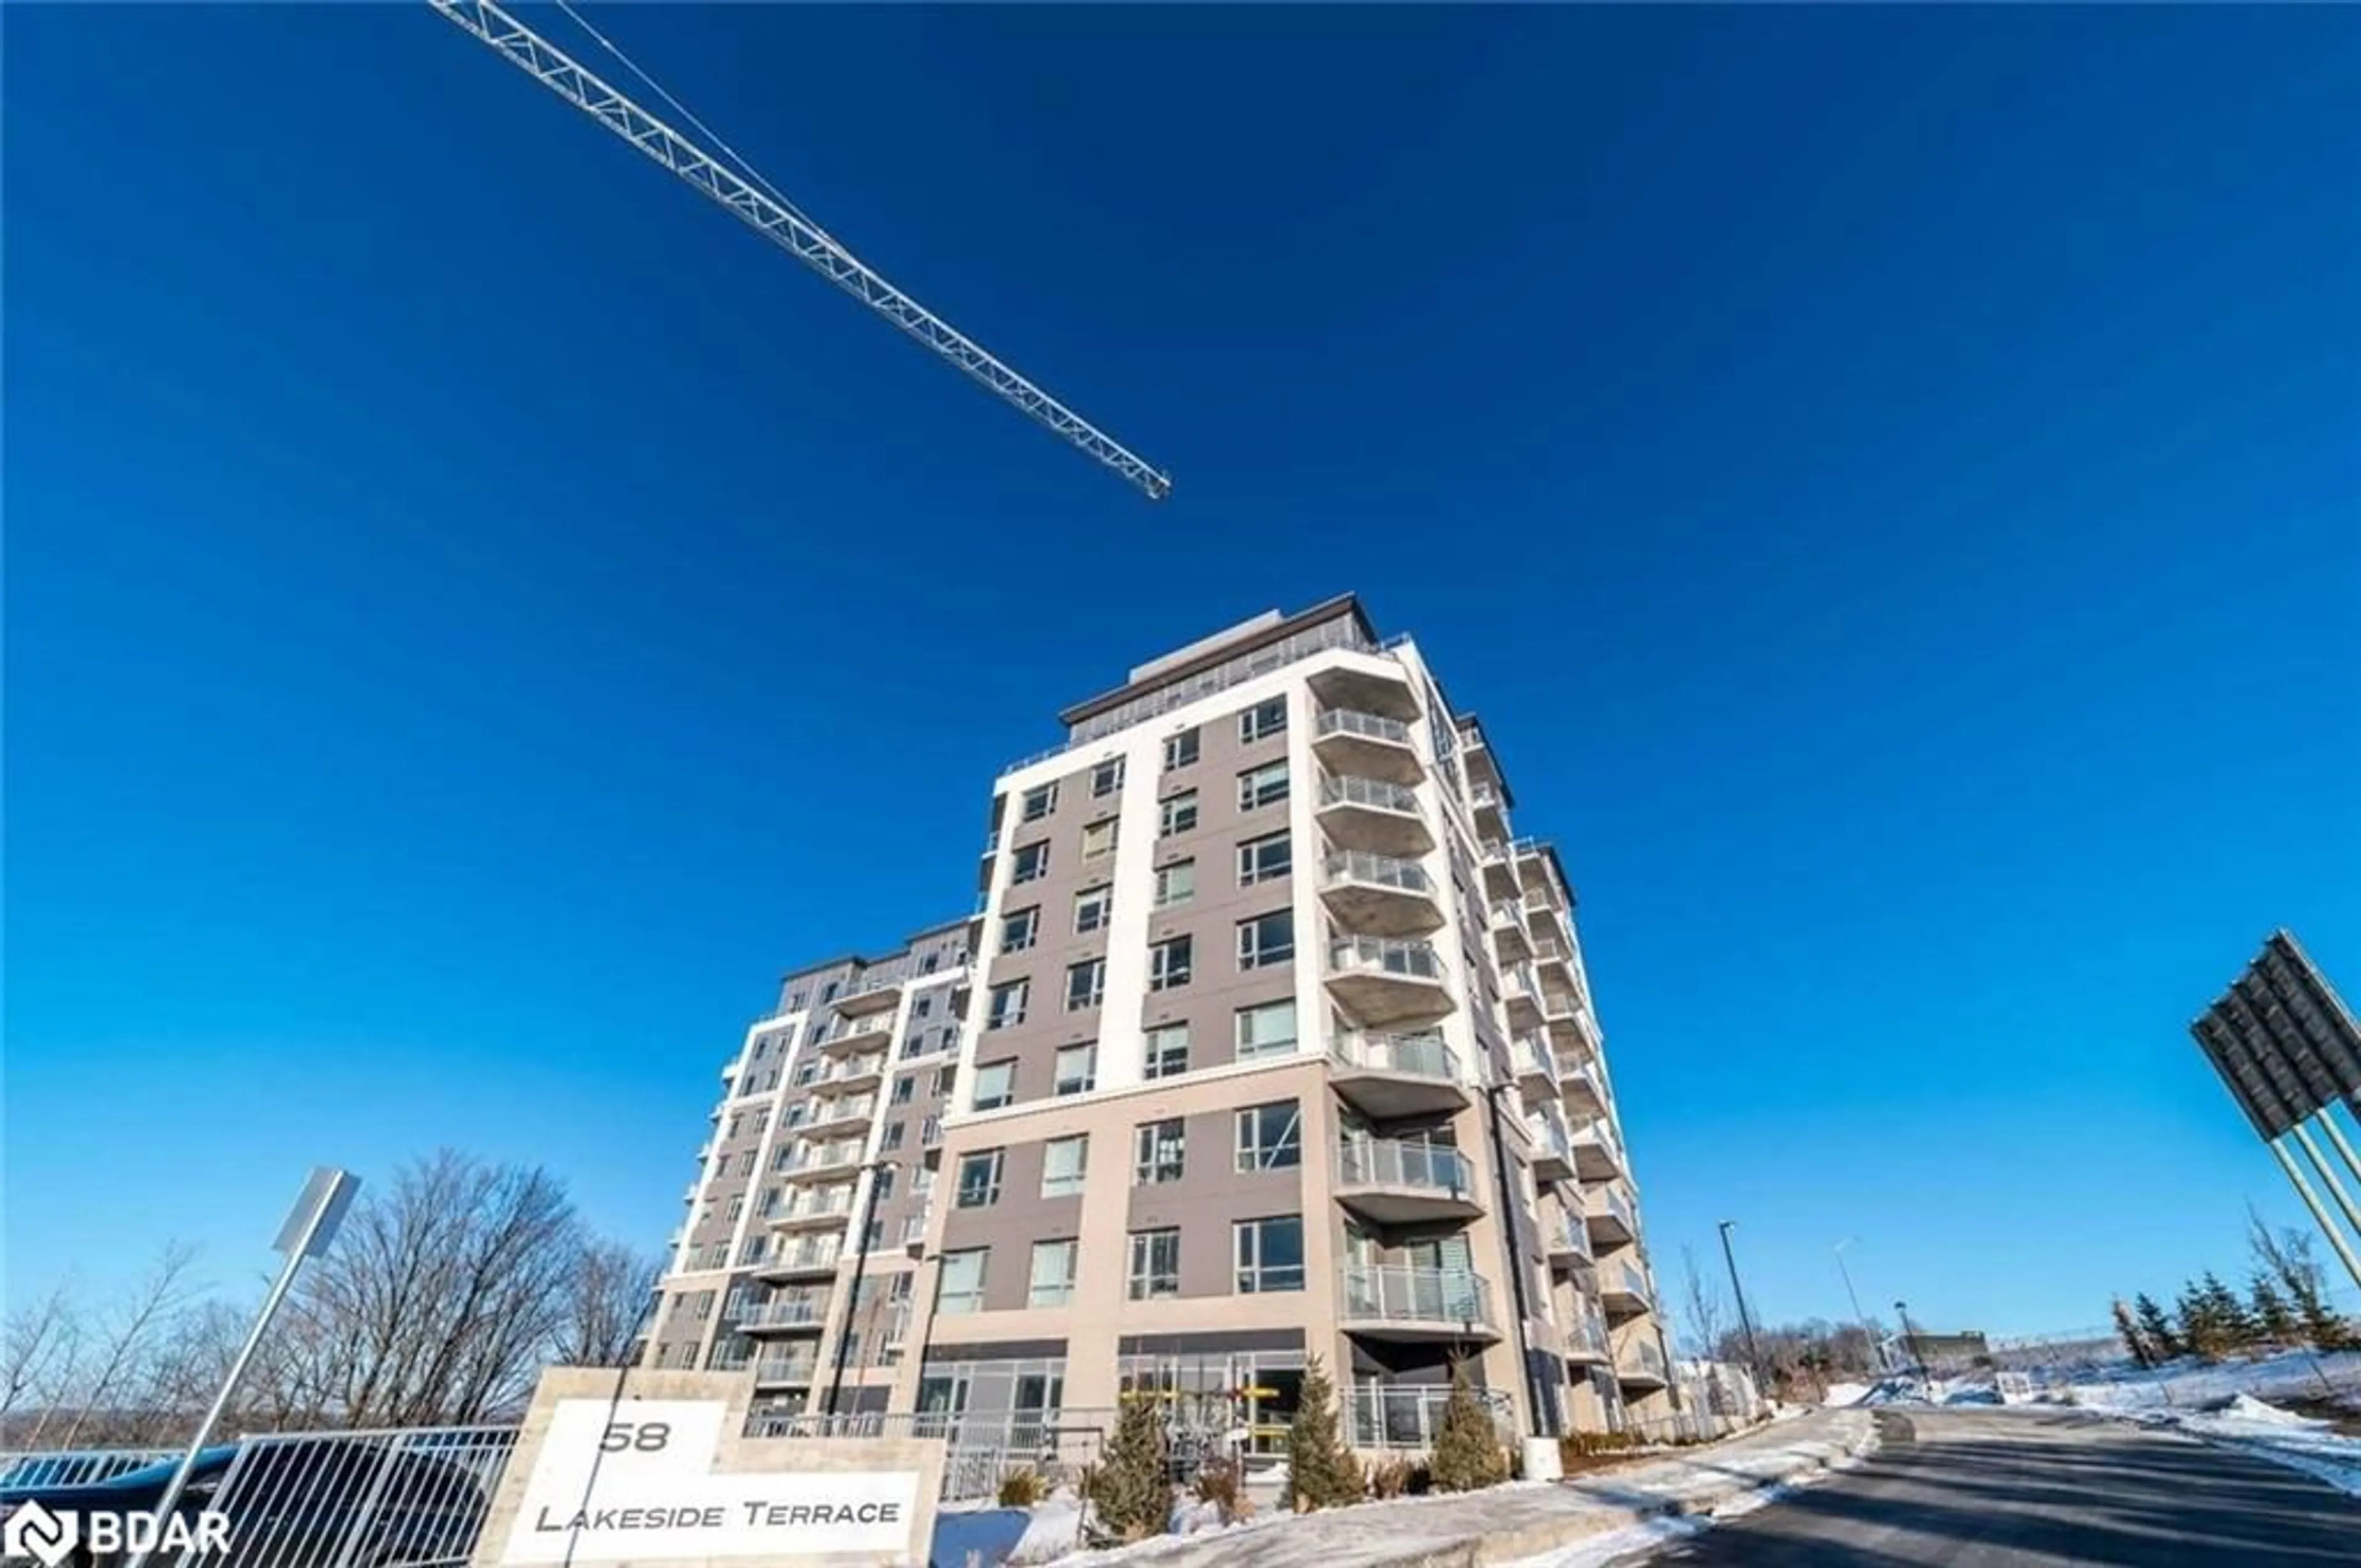 A pic from exterior of the house or condo for 58 Lakeside Terrace #215, Barrie Ontario L4M 7B9